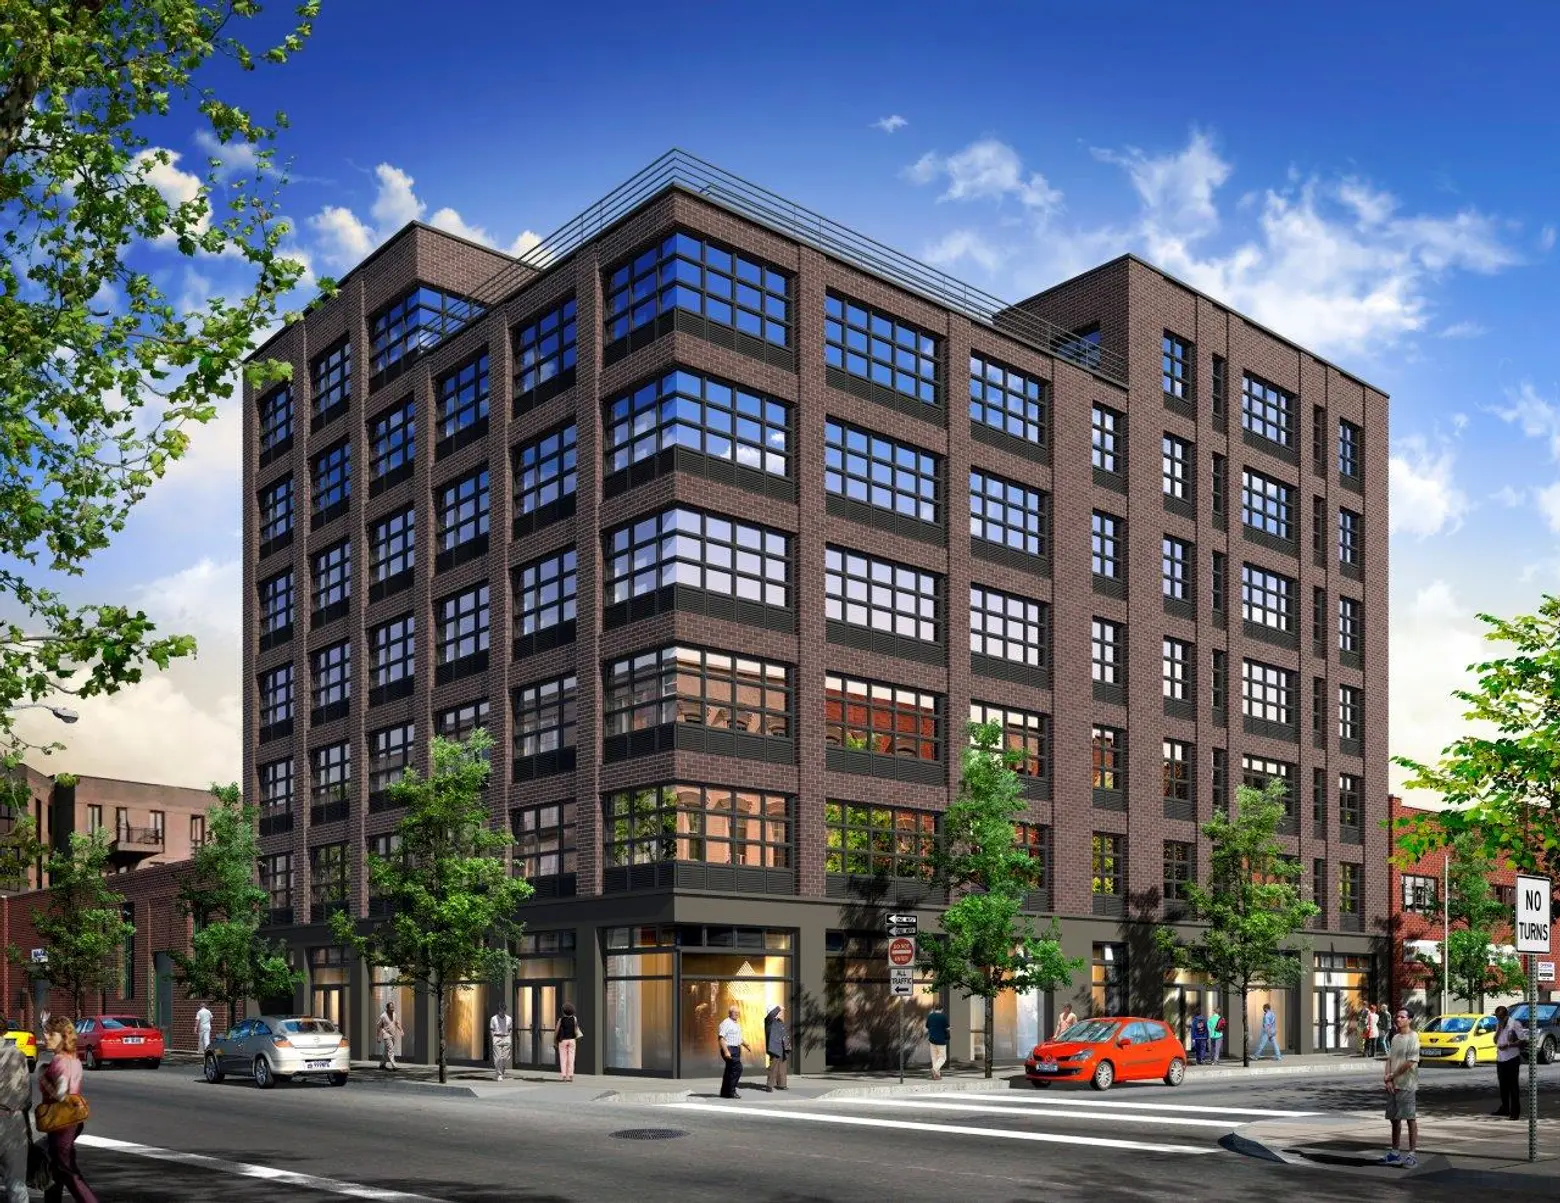 10 chances to live in hip East Williamsburg from $833/month